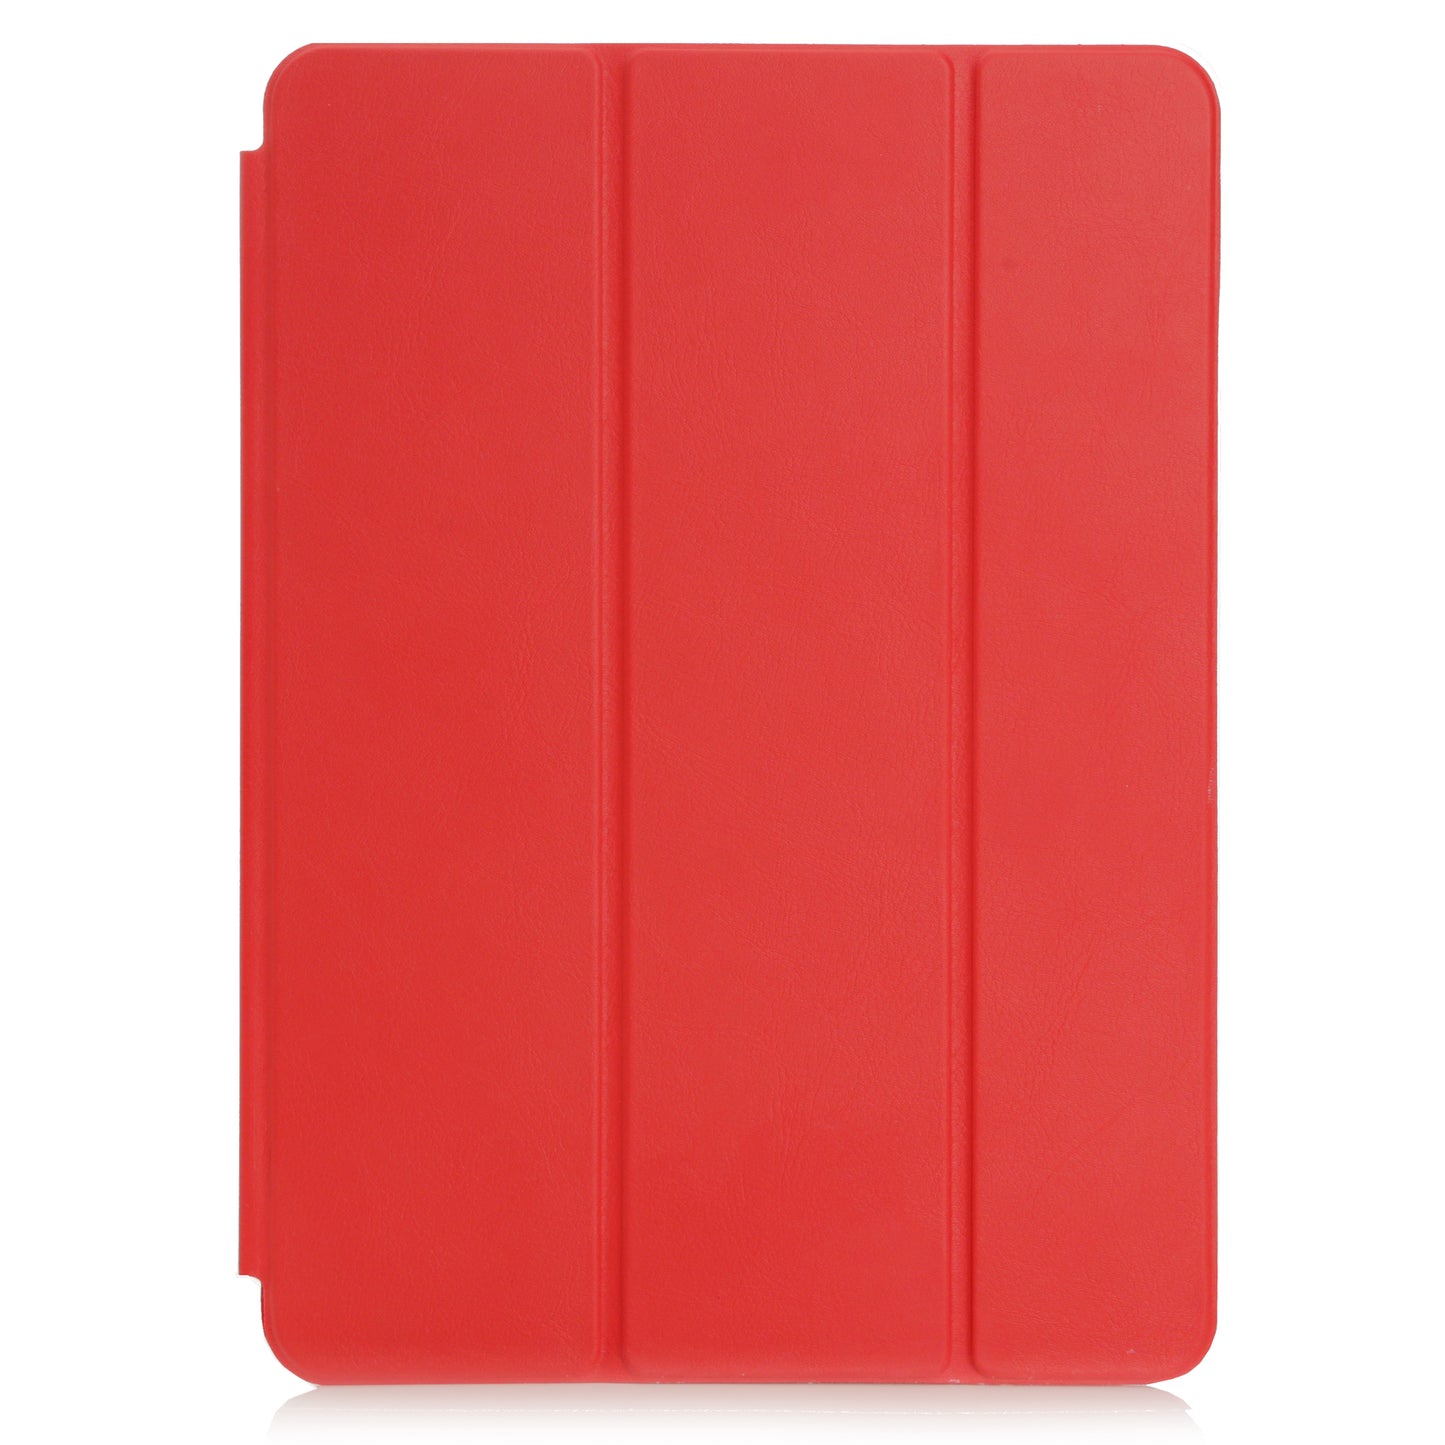 iCEO iPad Air 2 SmartCover Case